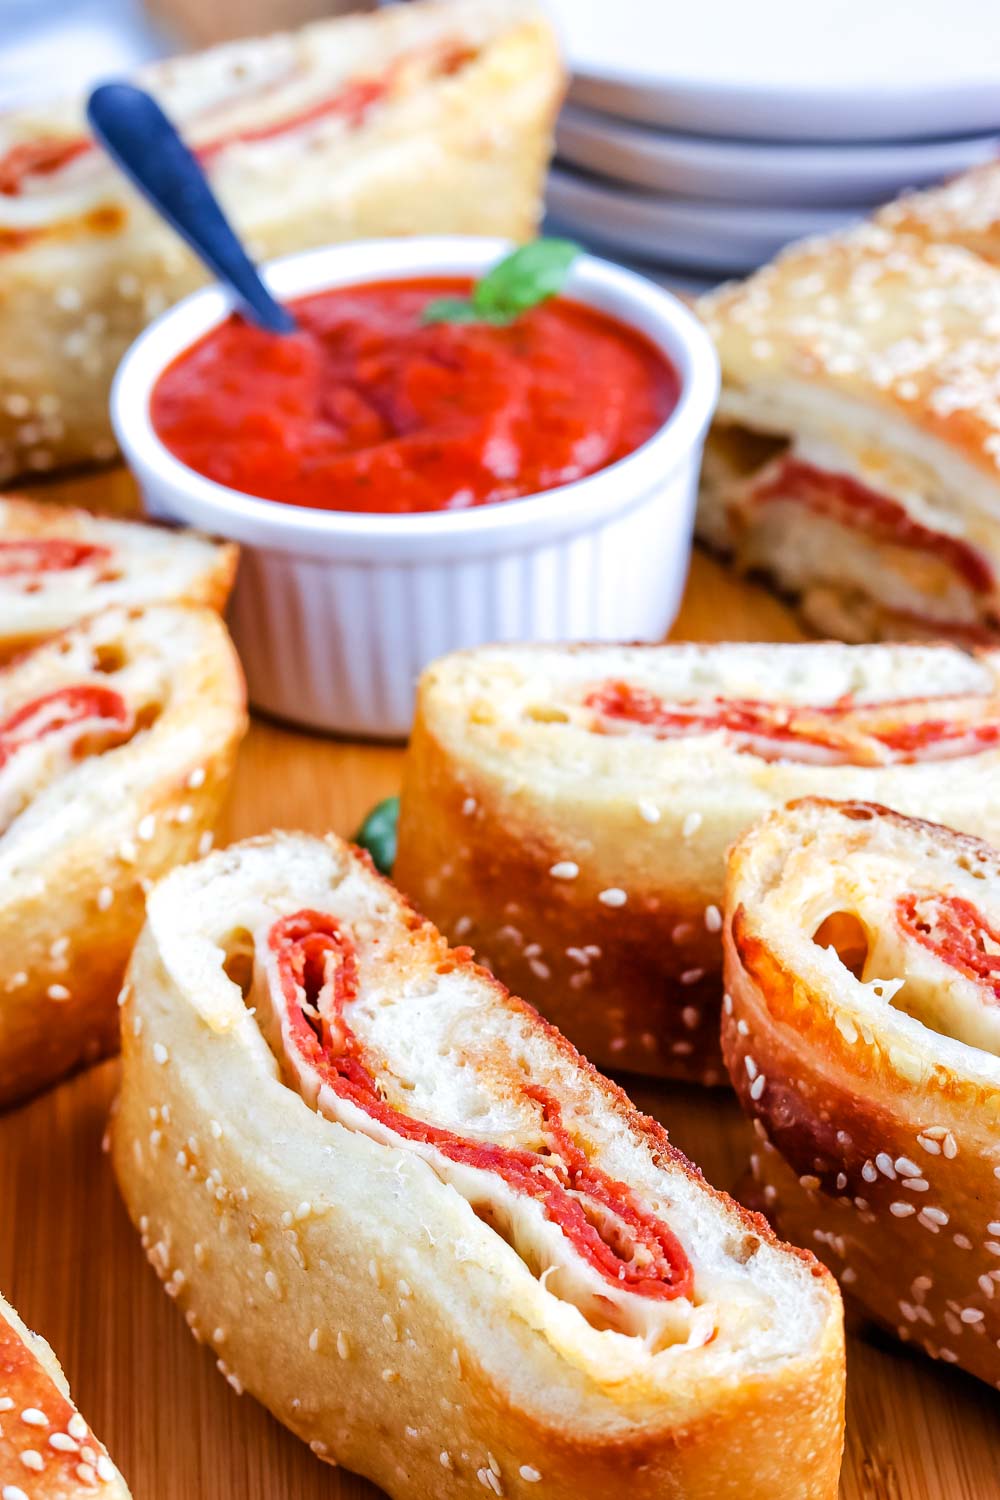 A close up picture of sliced stromboli.